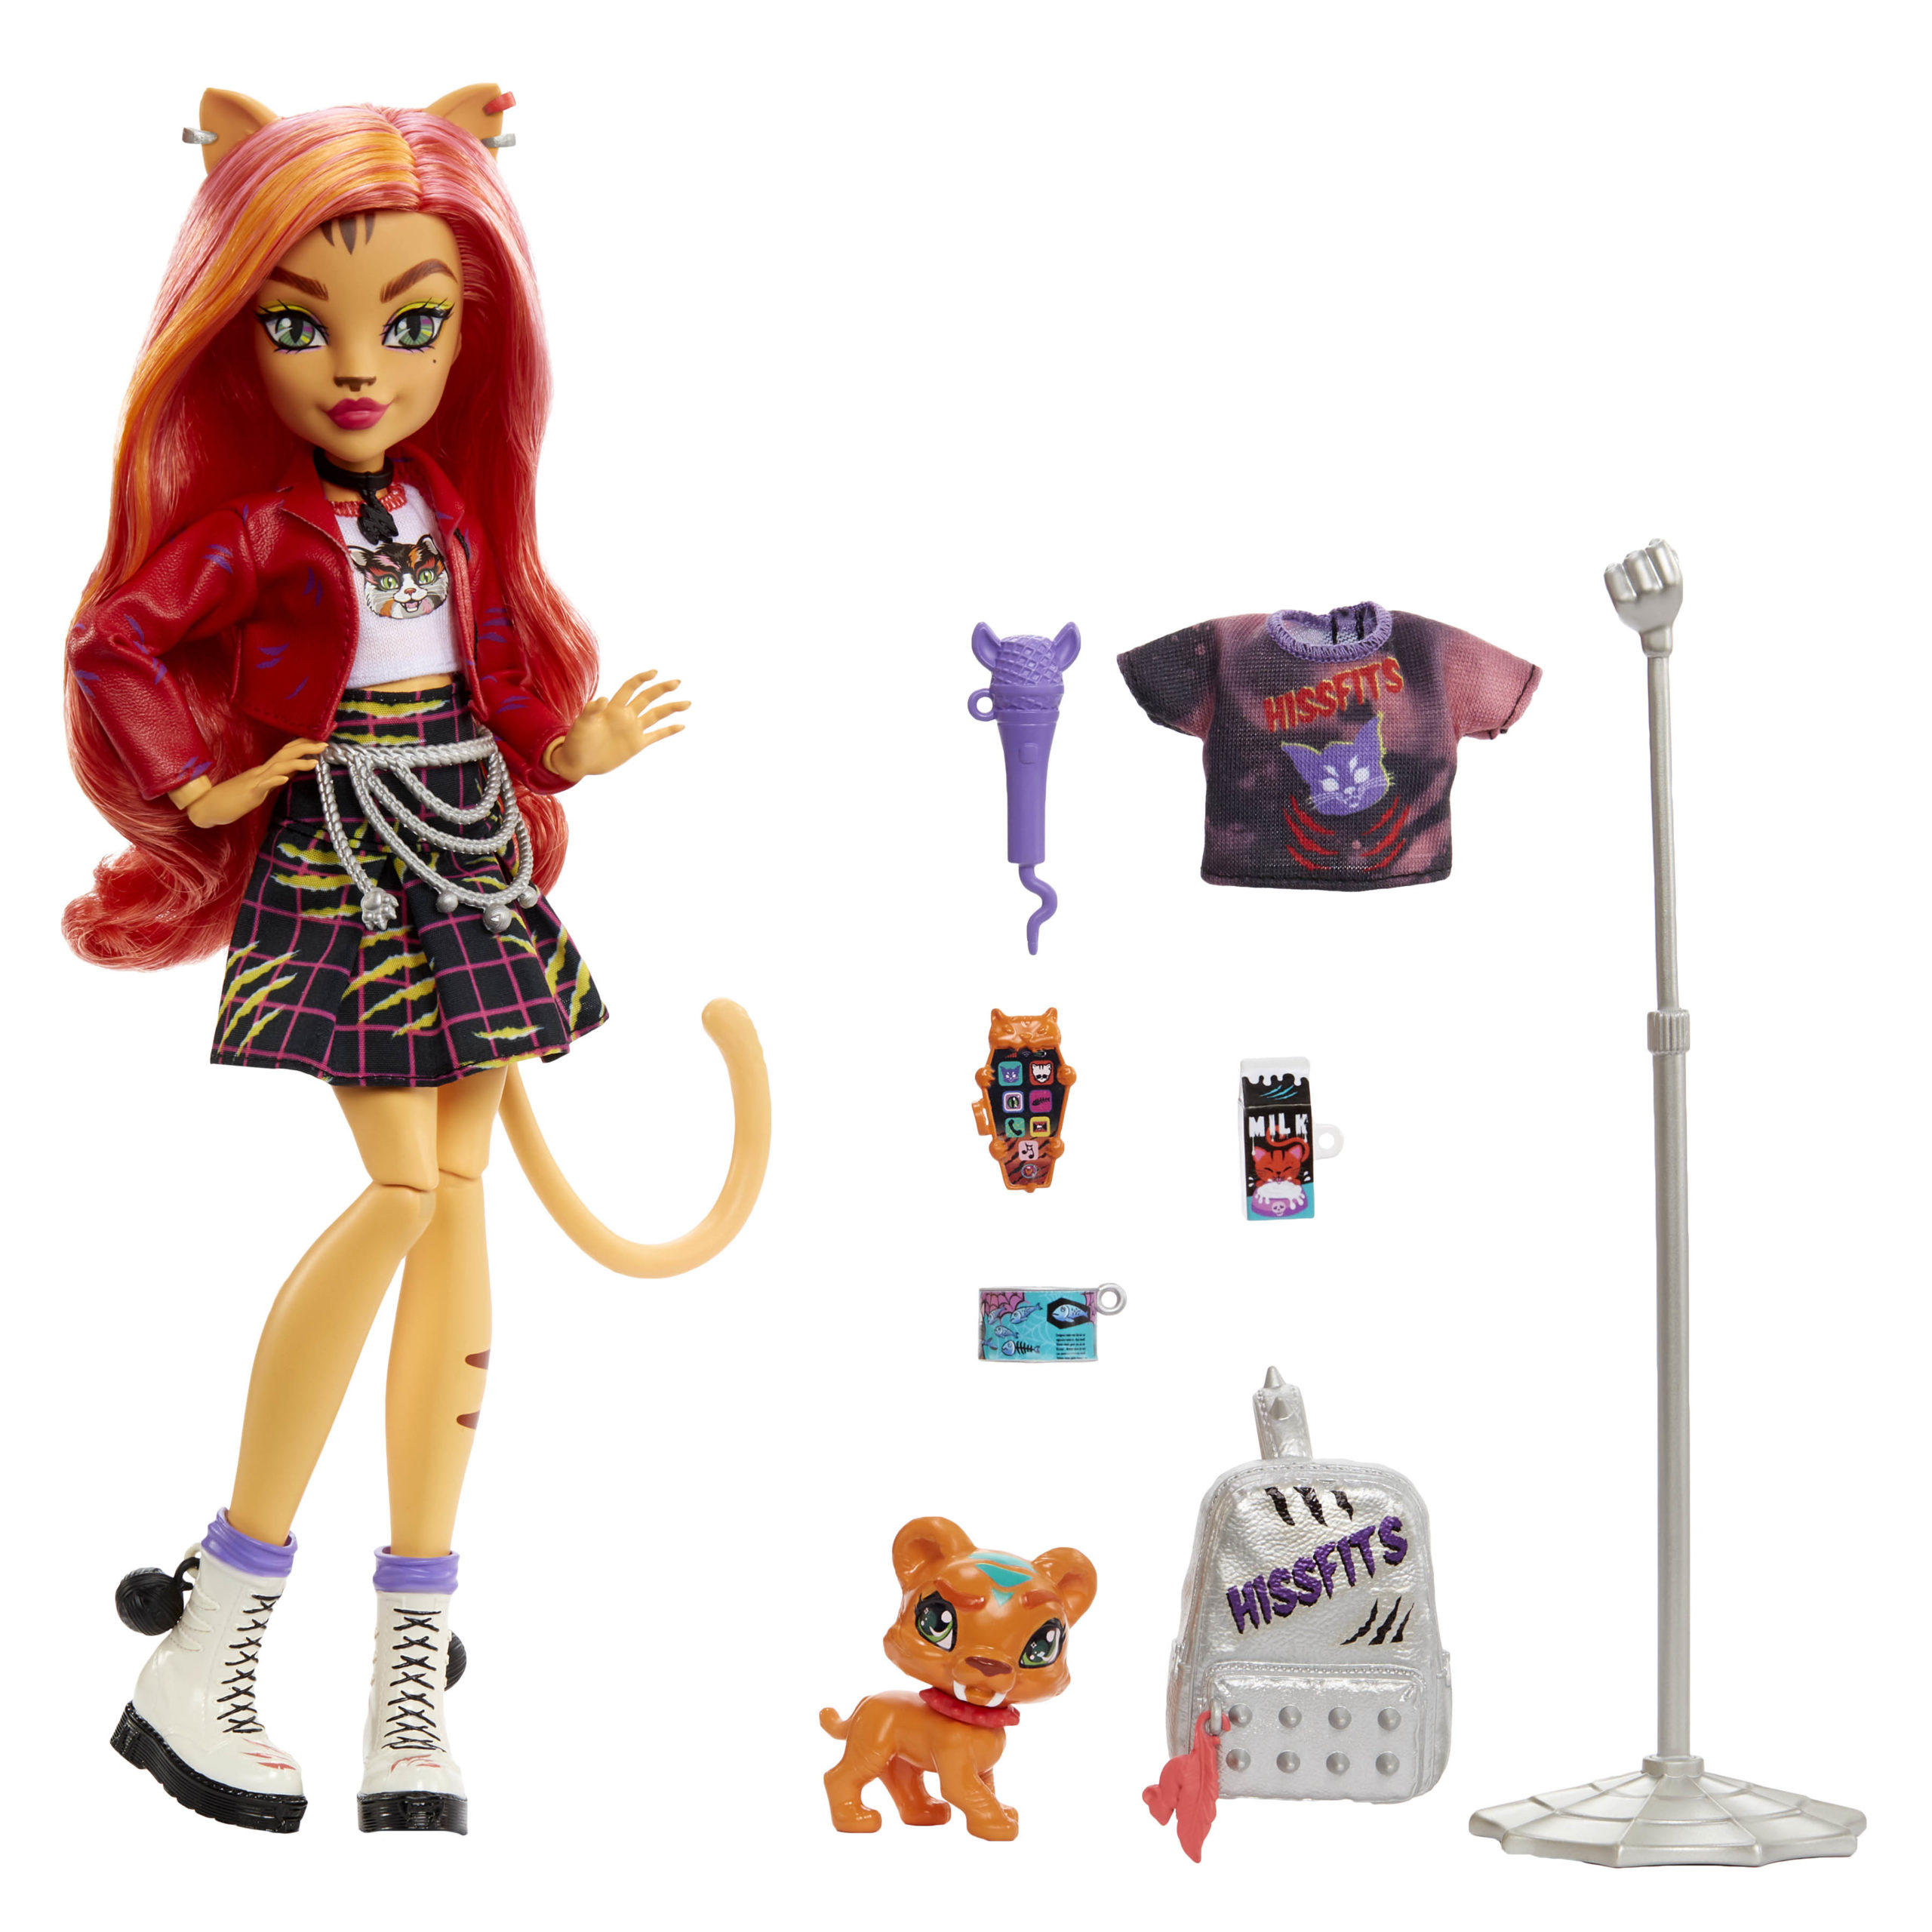 Monster High Dolls heading back to toy shelves | The Nerdy